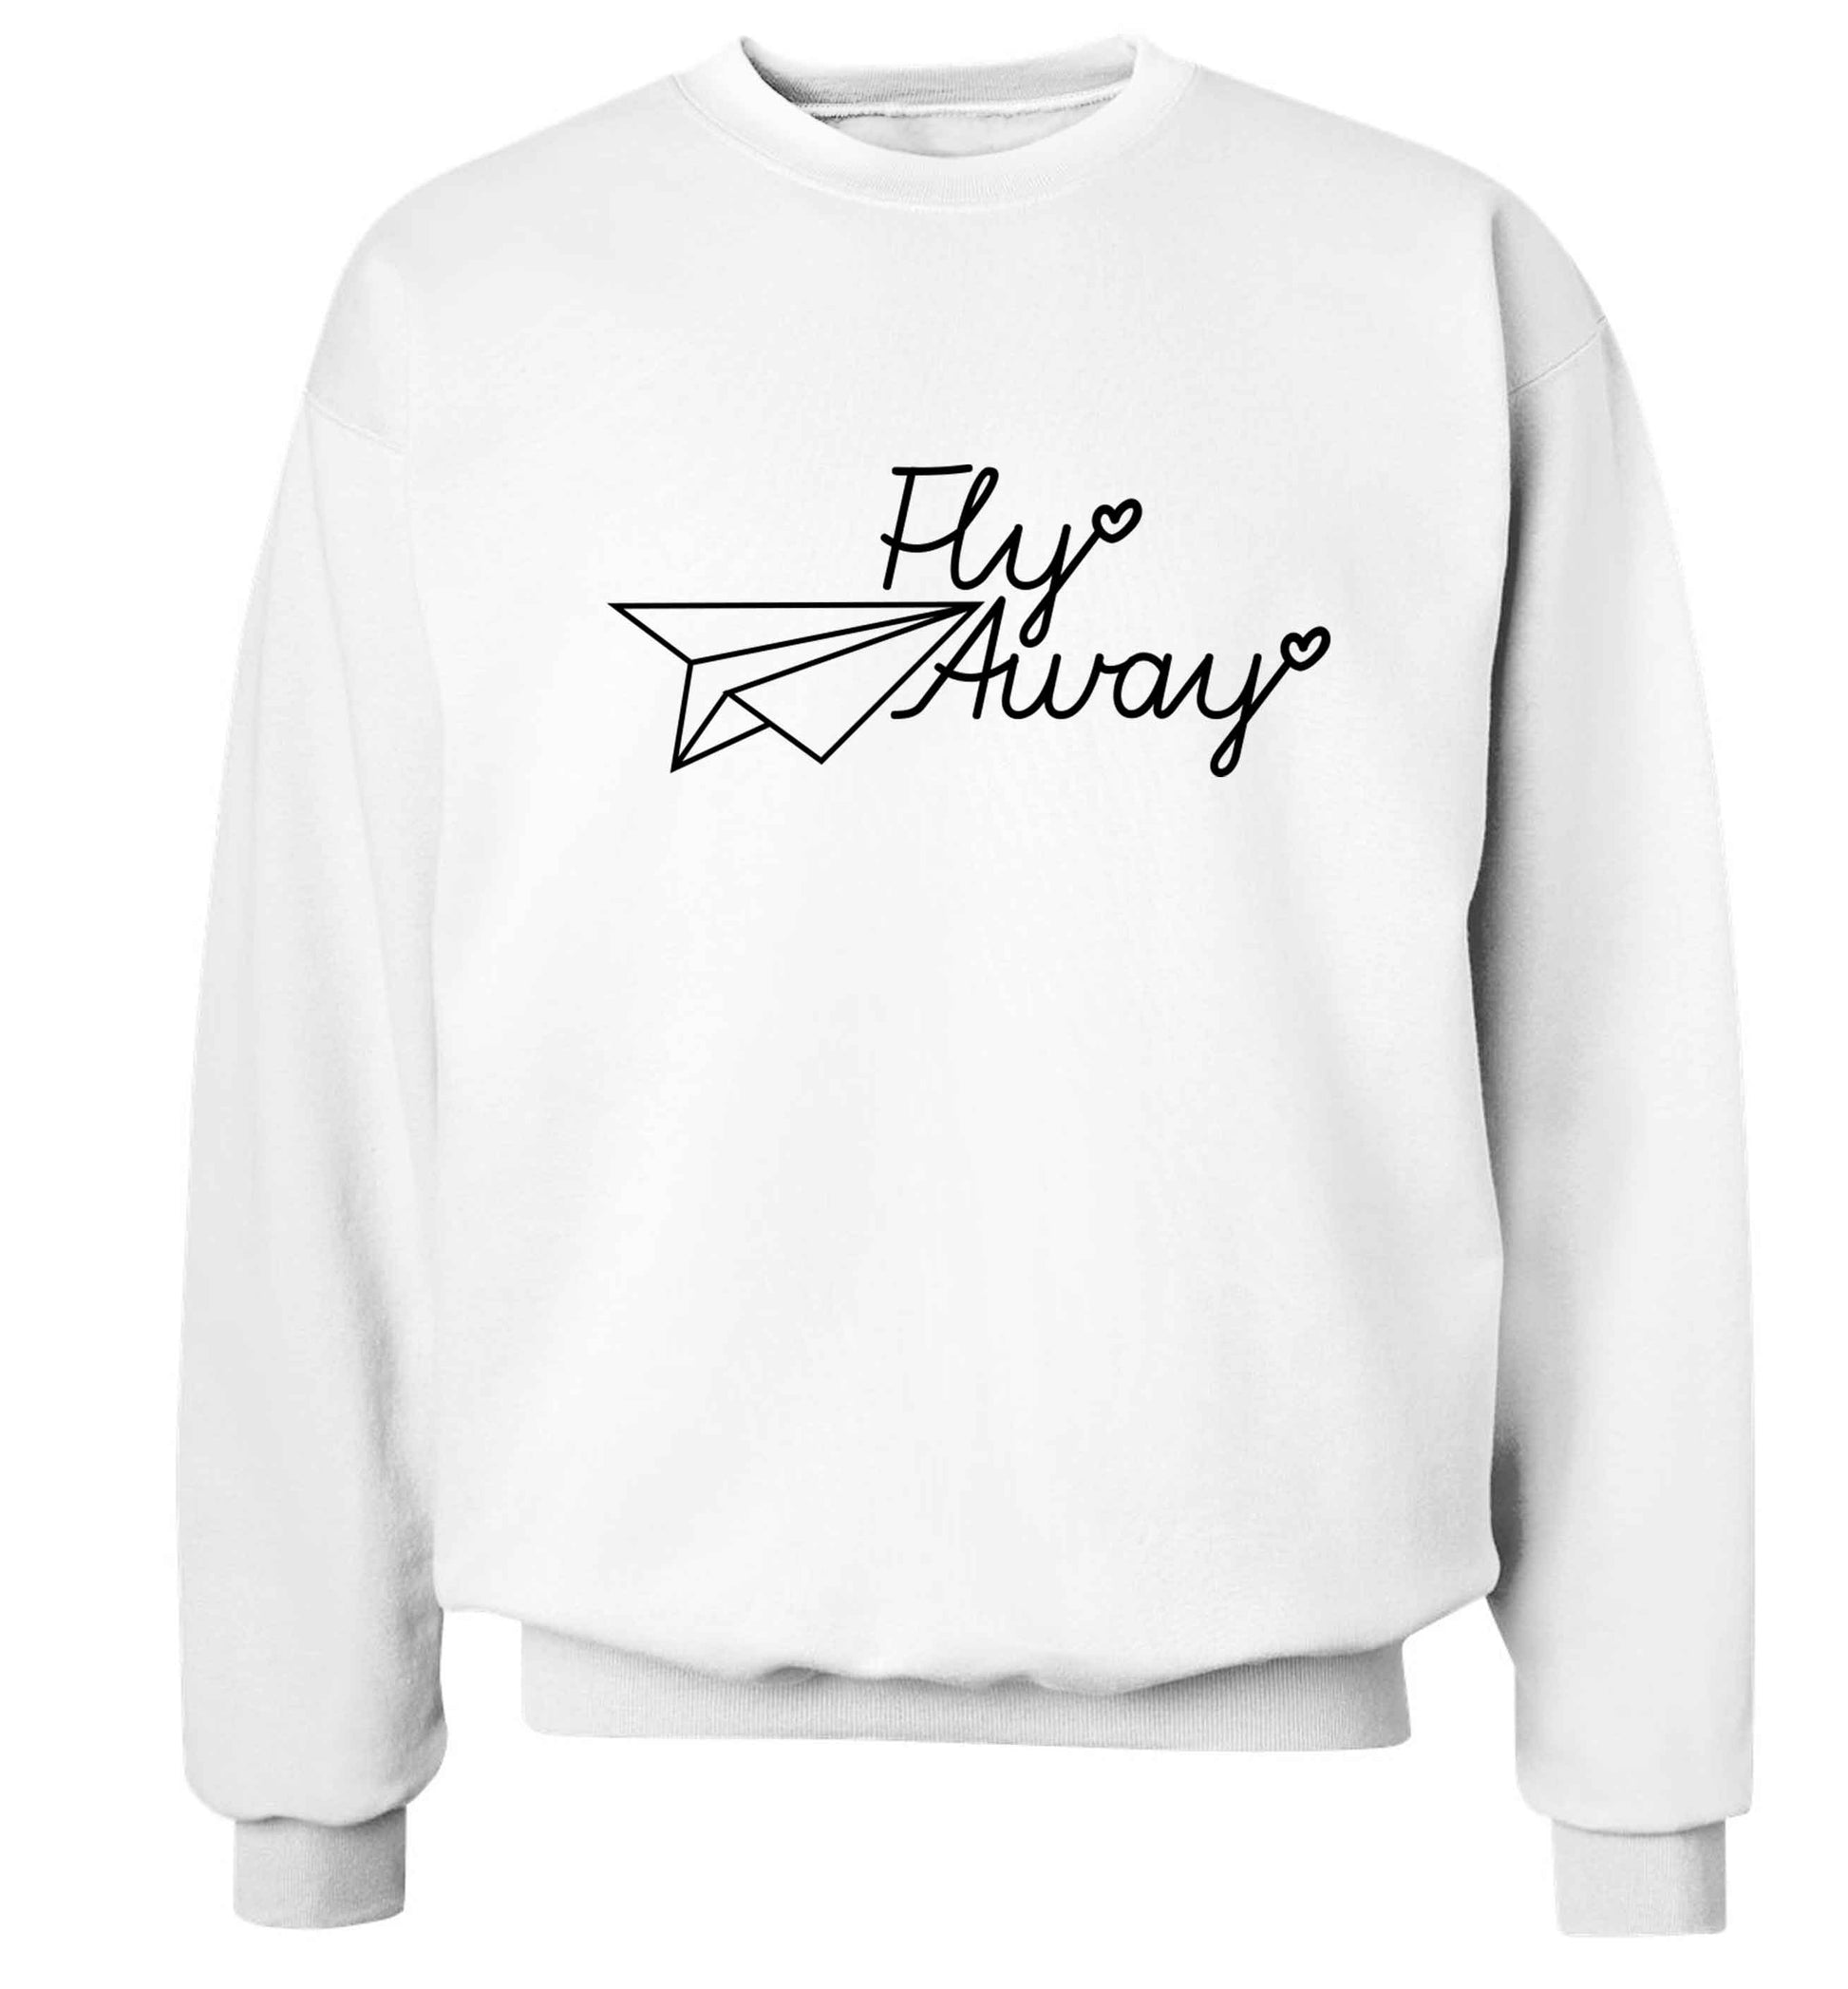 Fly away Adult's unisex white Sweater 2XL